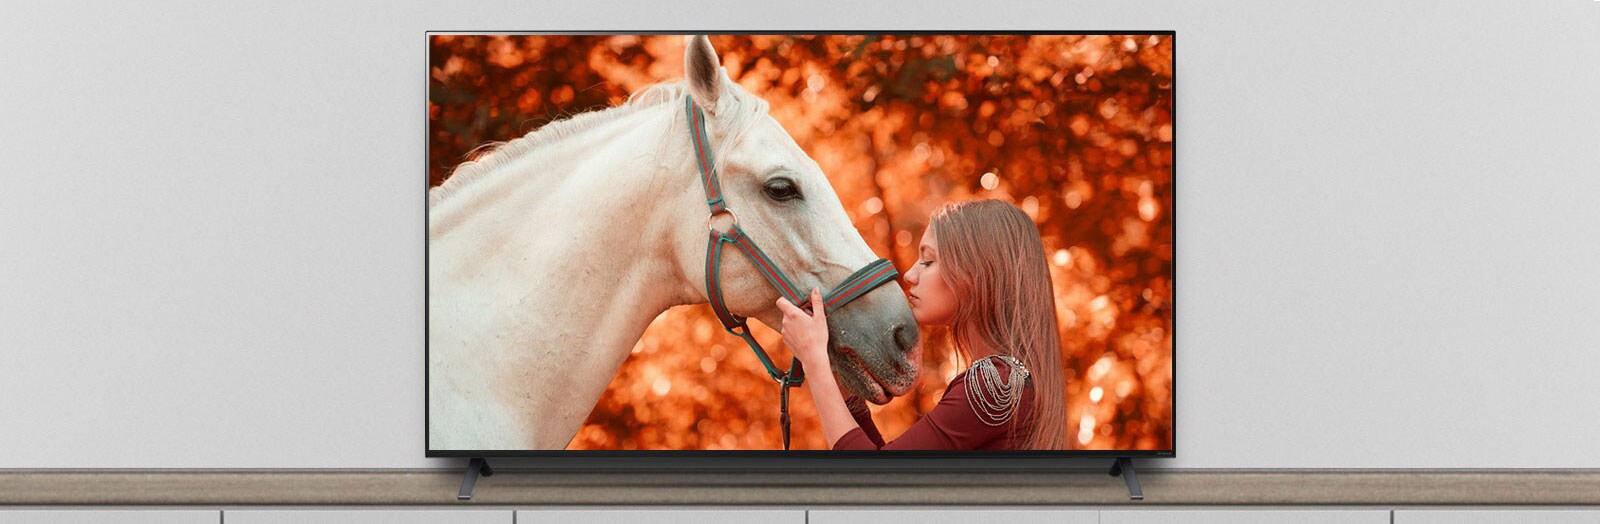 The TV is on the stand, and the screen shows a scene of a movie featuring a horse and a woman.